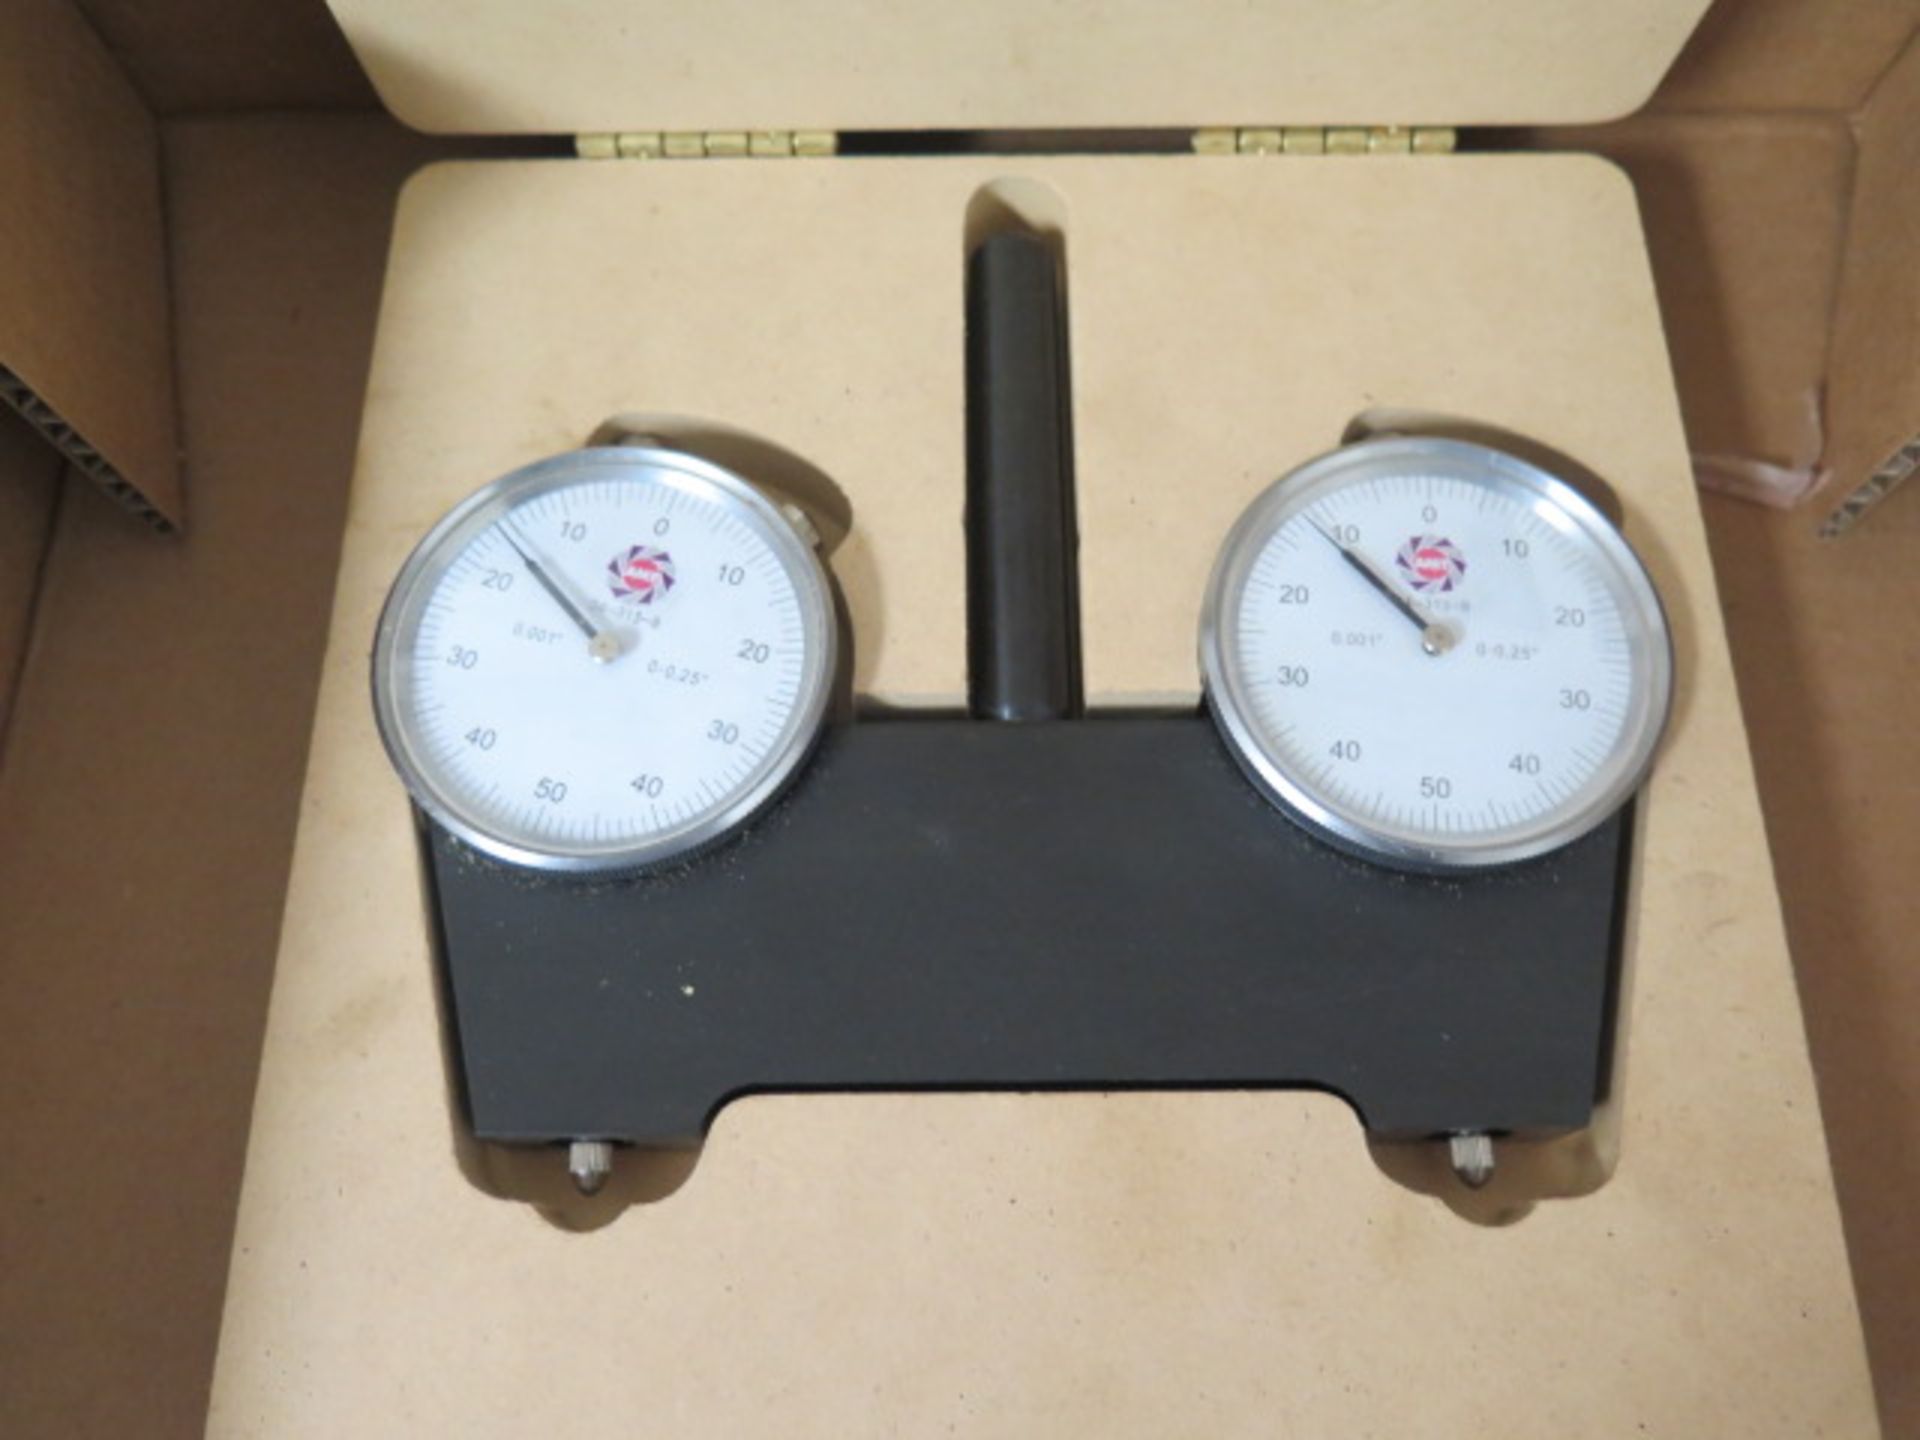 AMT Dial Spindle Square, Tesa Dial Depth Gage and (2) Micrometer Stands - Image 2 of 3